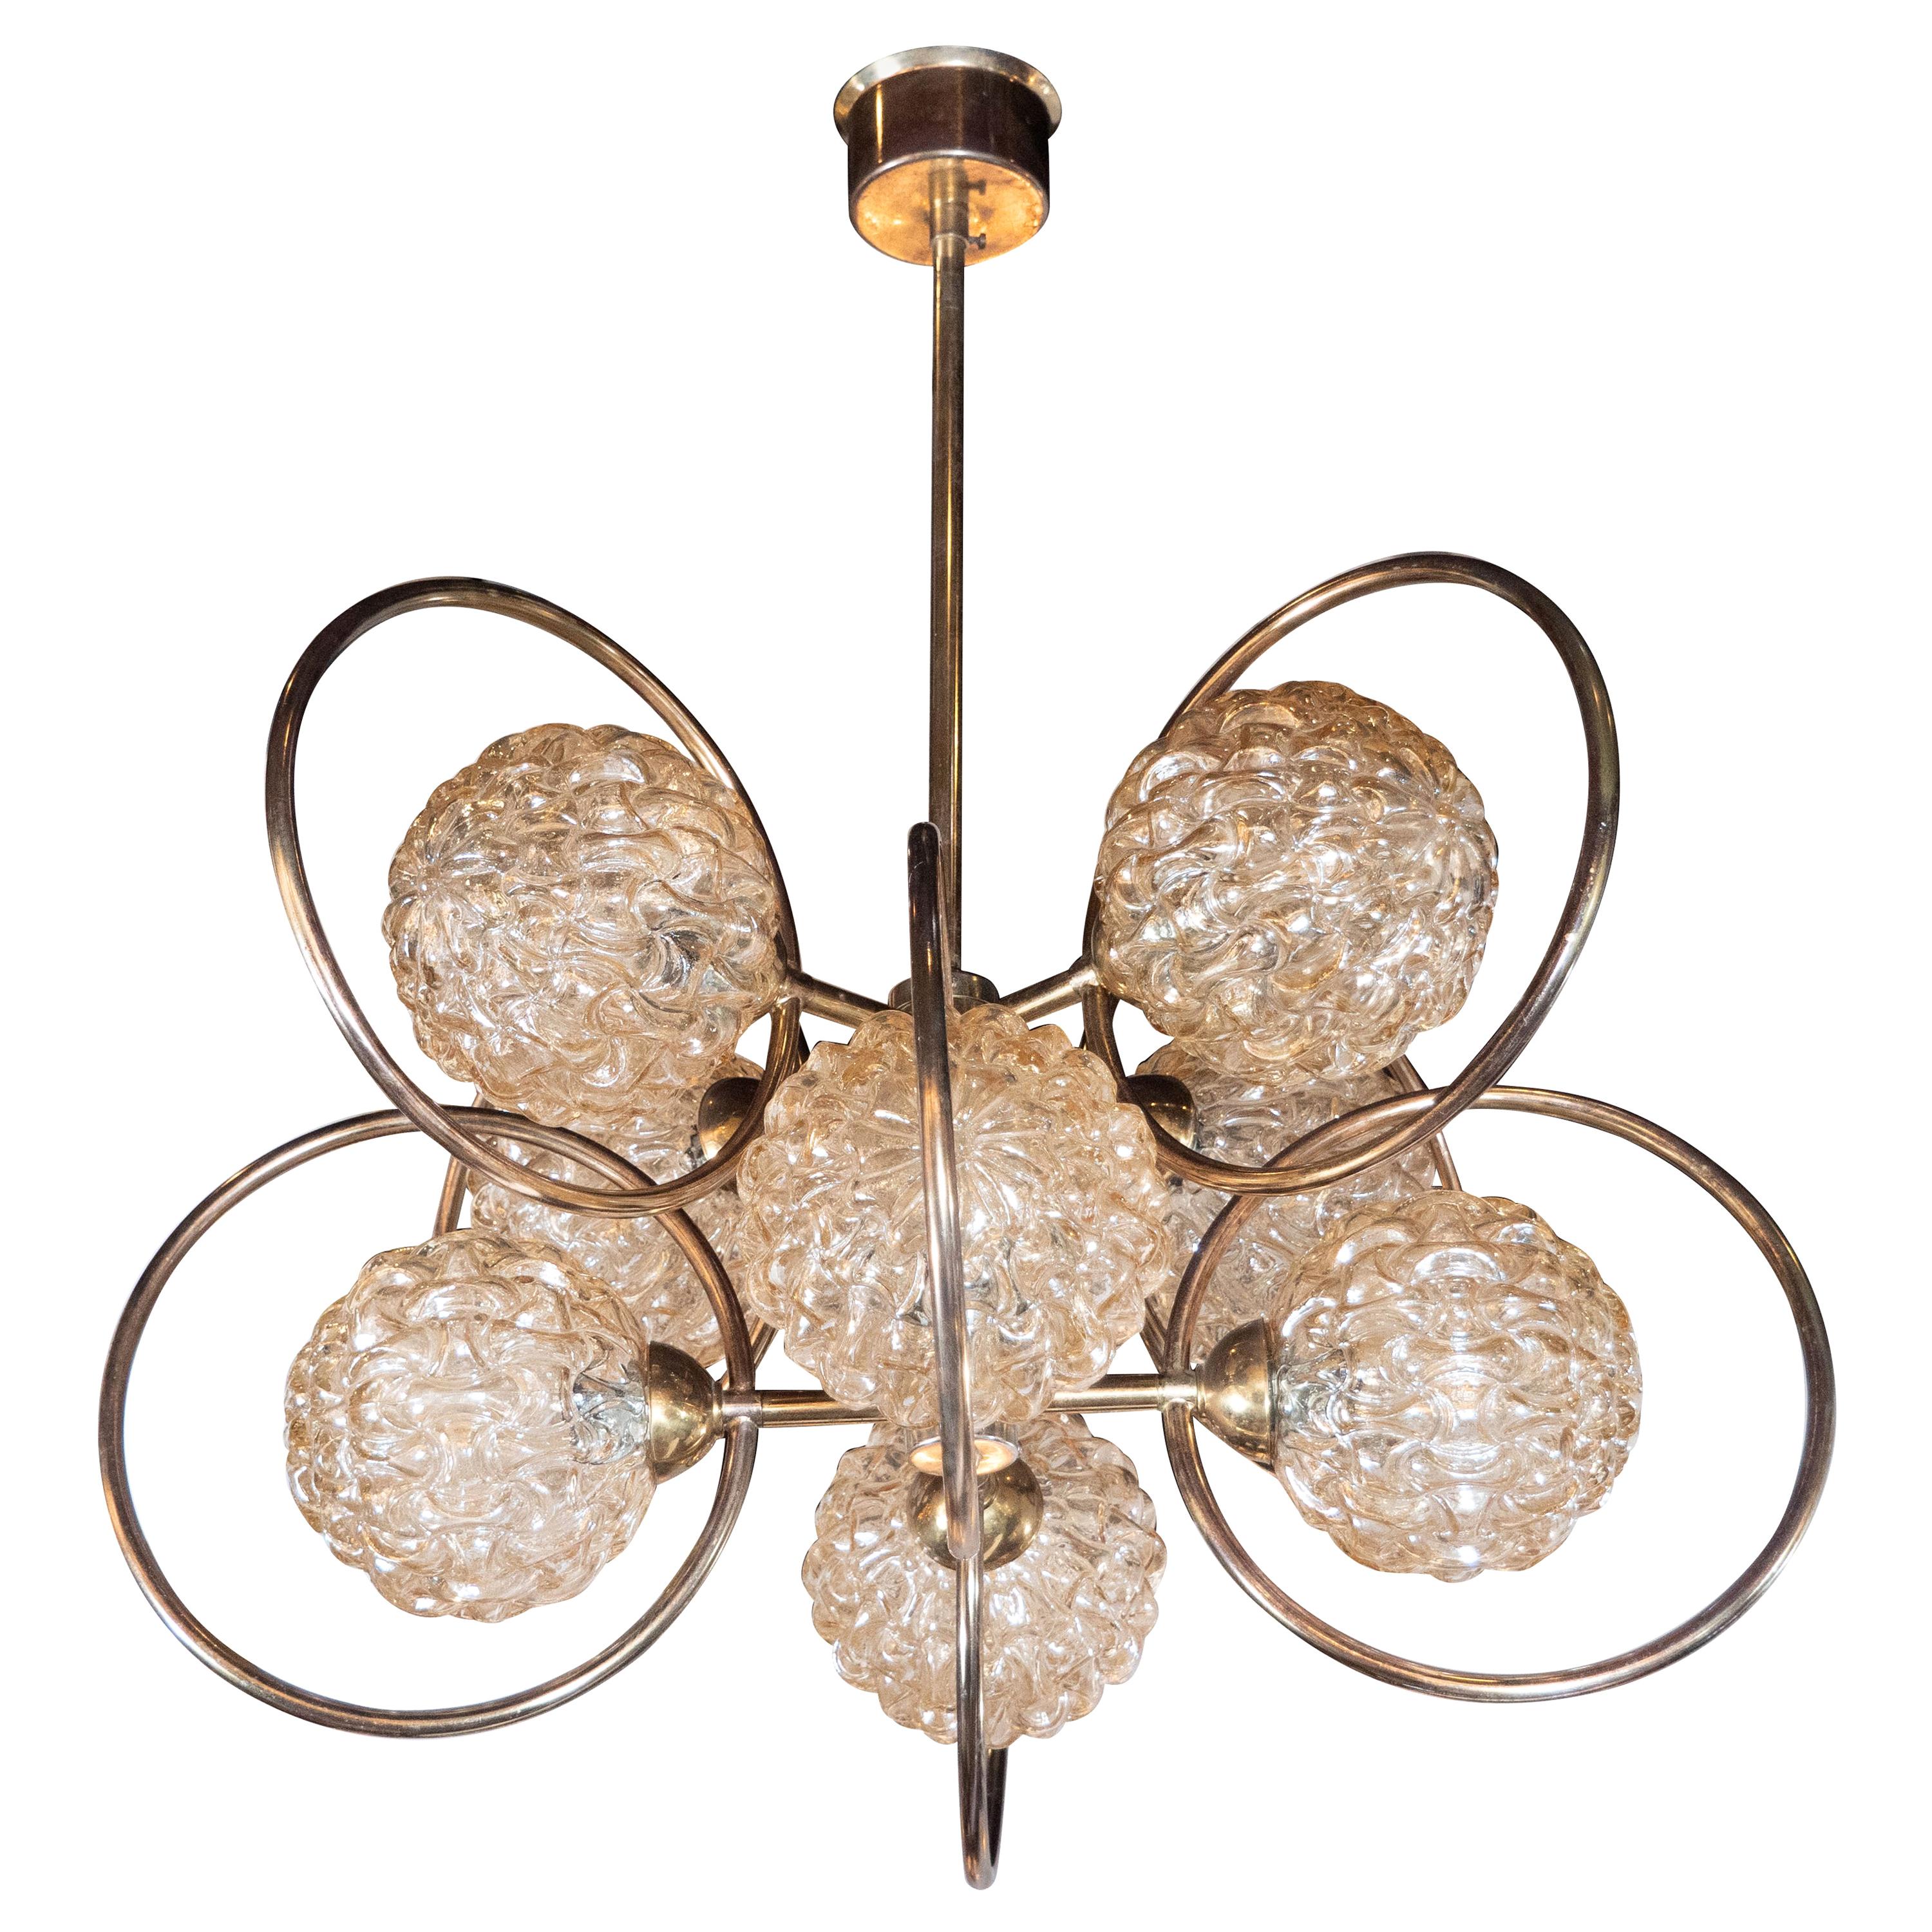 Italian Mid-Century Modern Brass and Champagne-Colored Textural Glass Chandelier